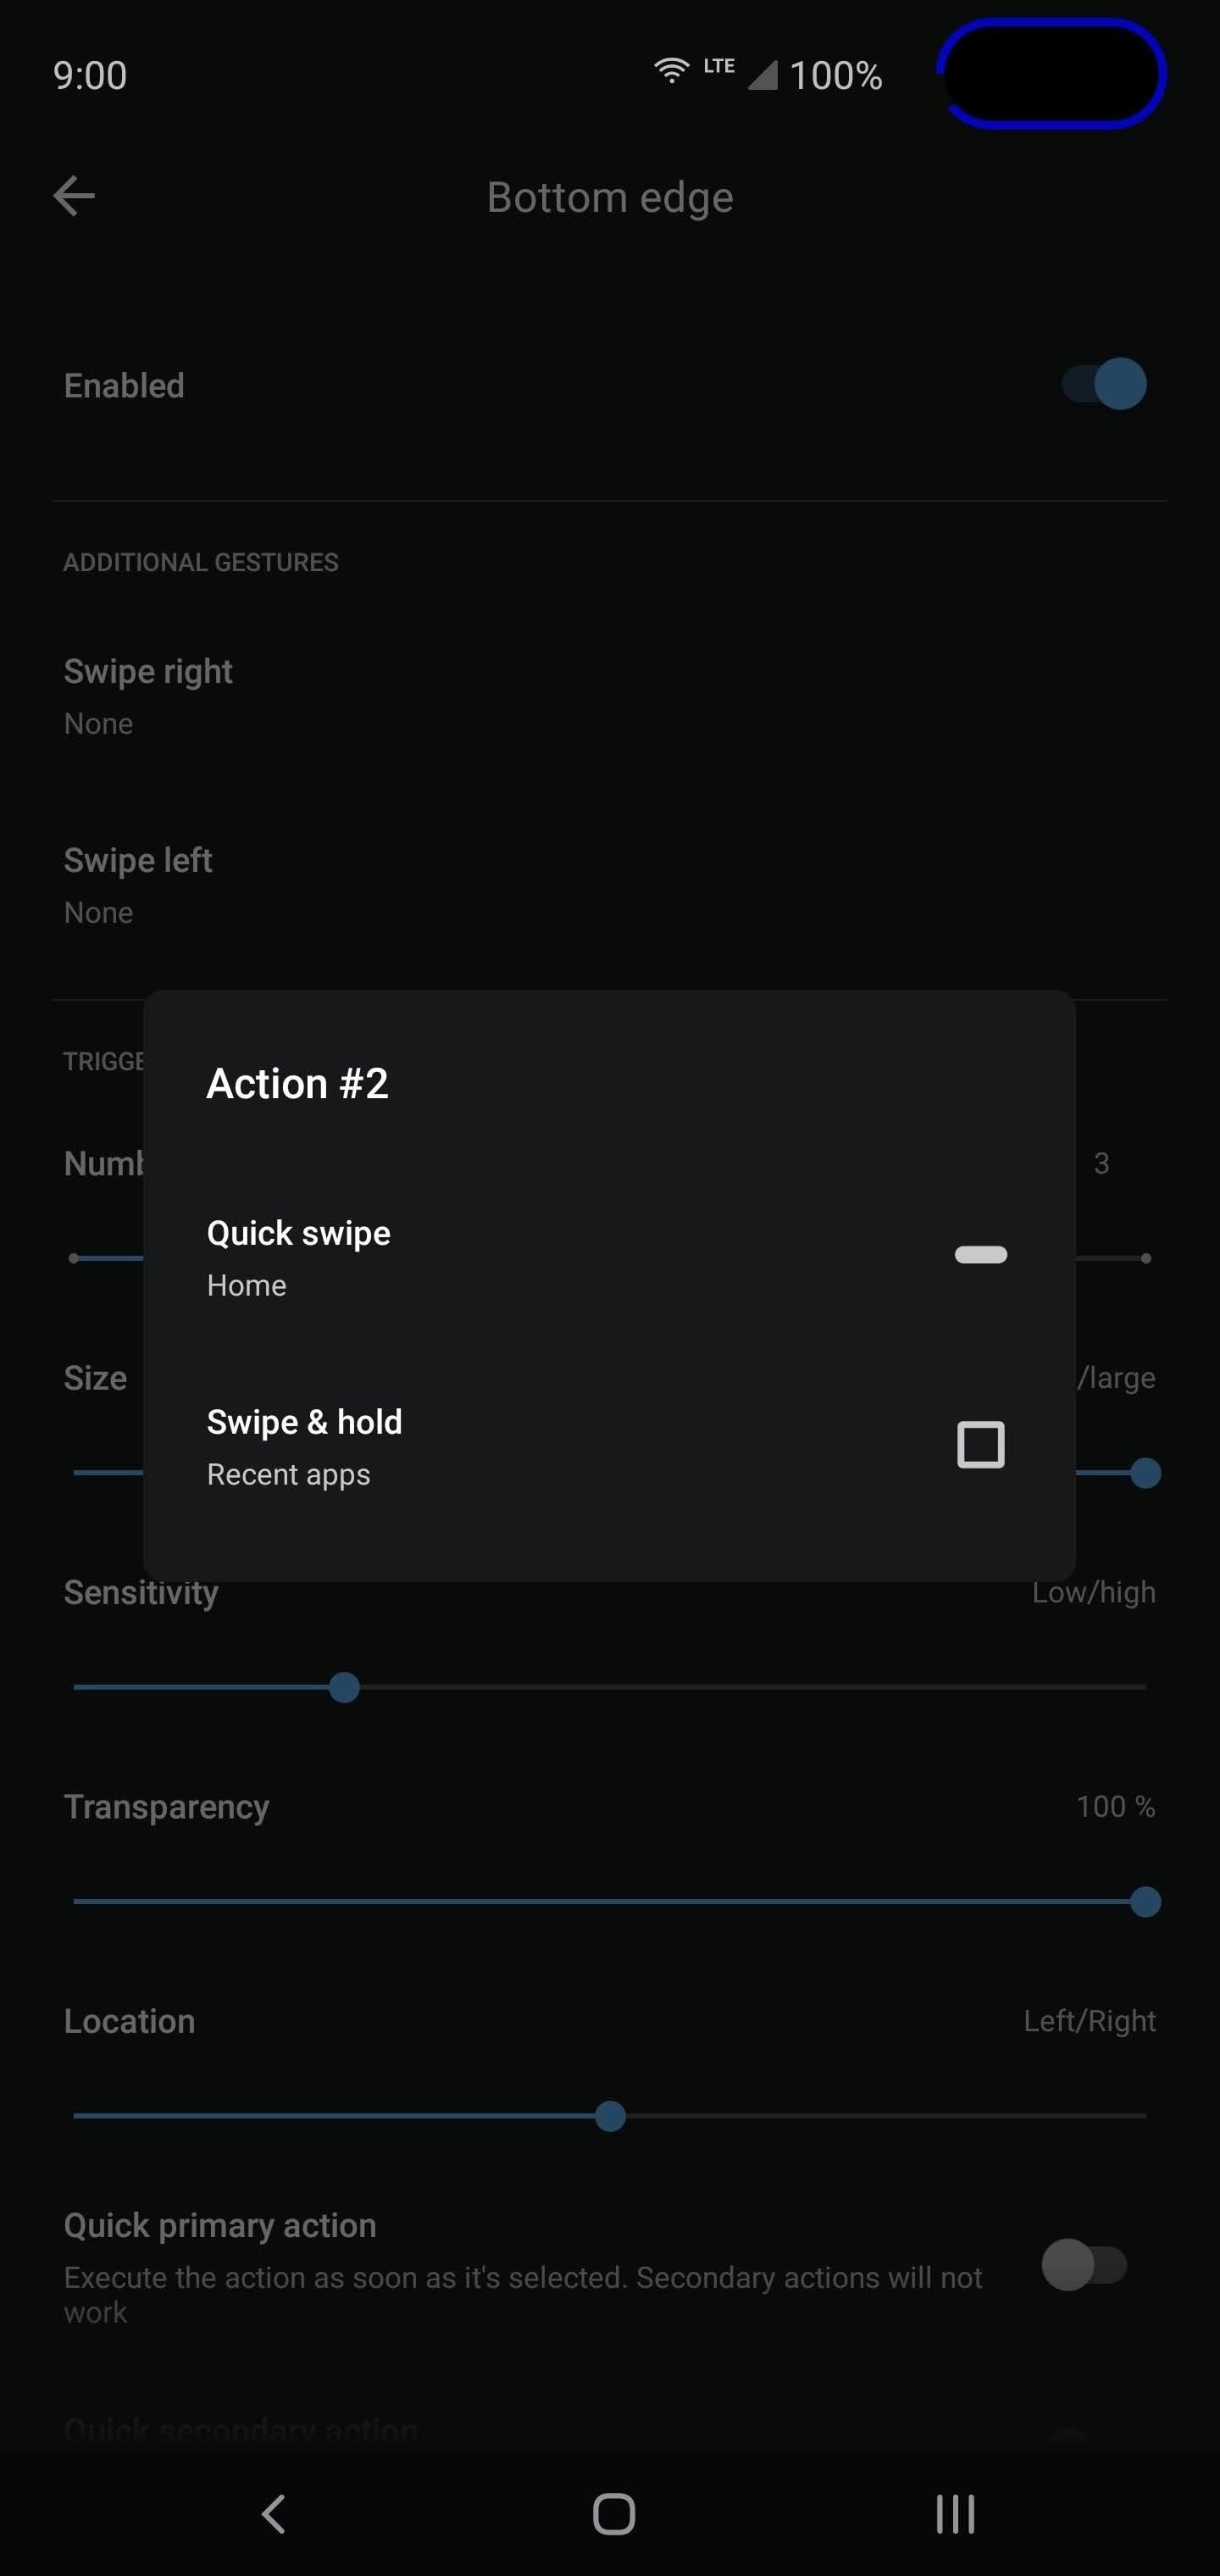 How to Get Android 10's New Gestures on Any Phone